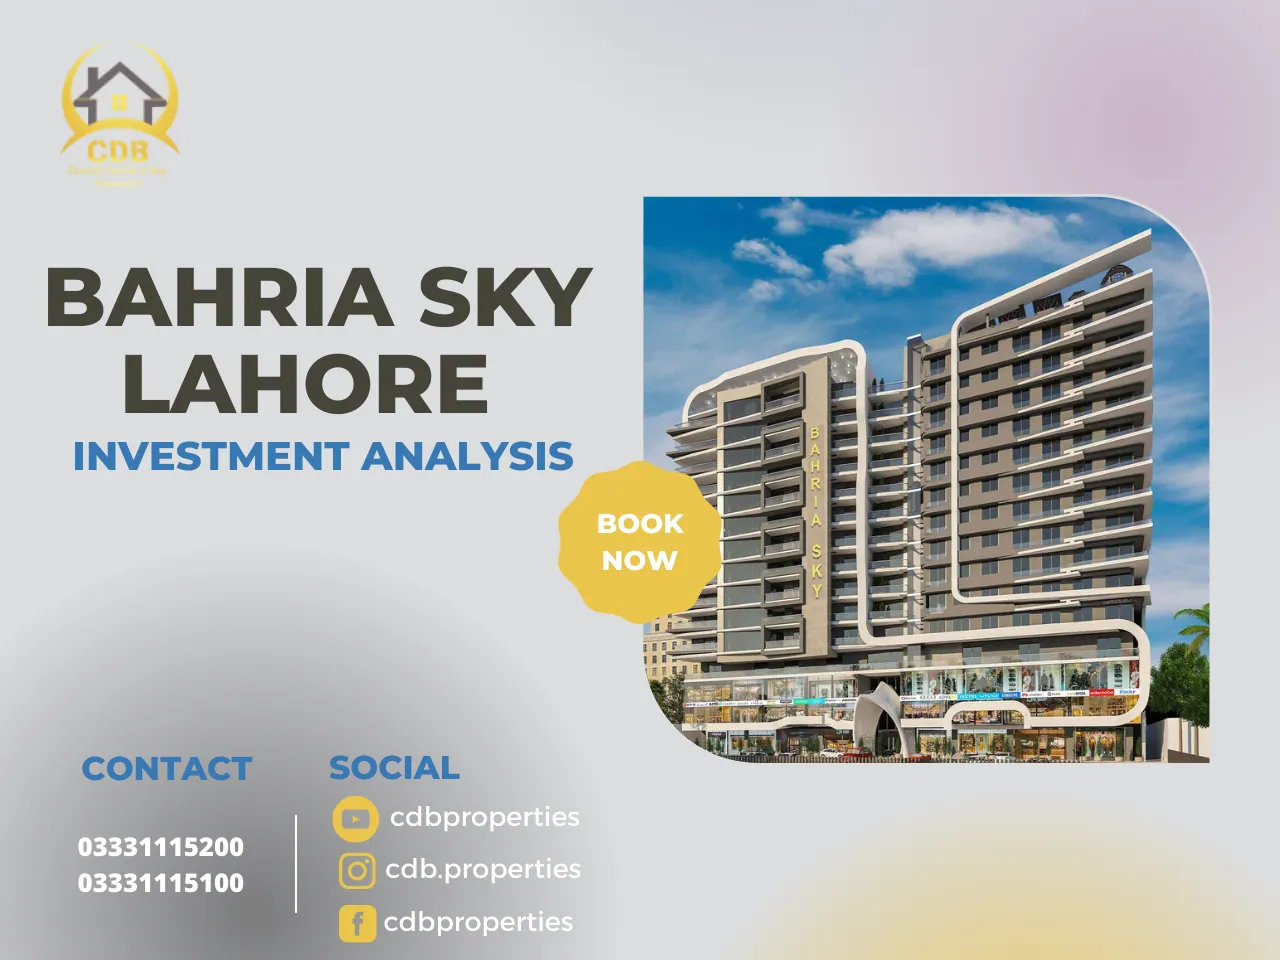 Bahria Sky Lahore Investment Analysis